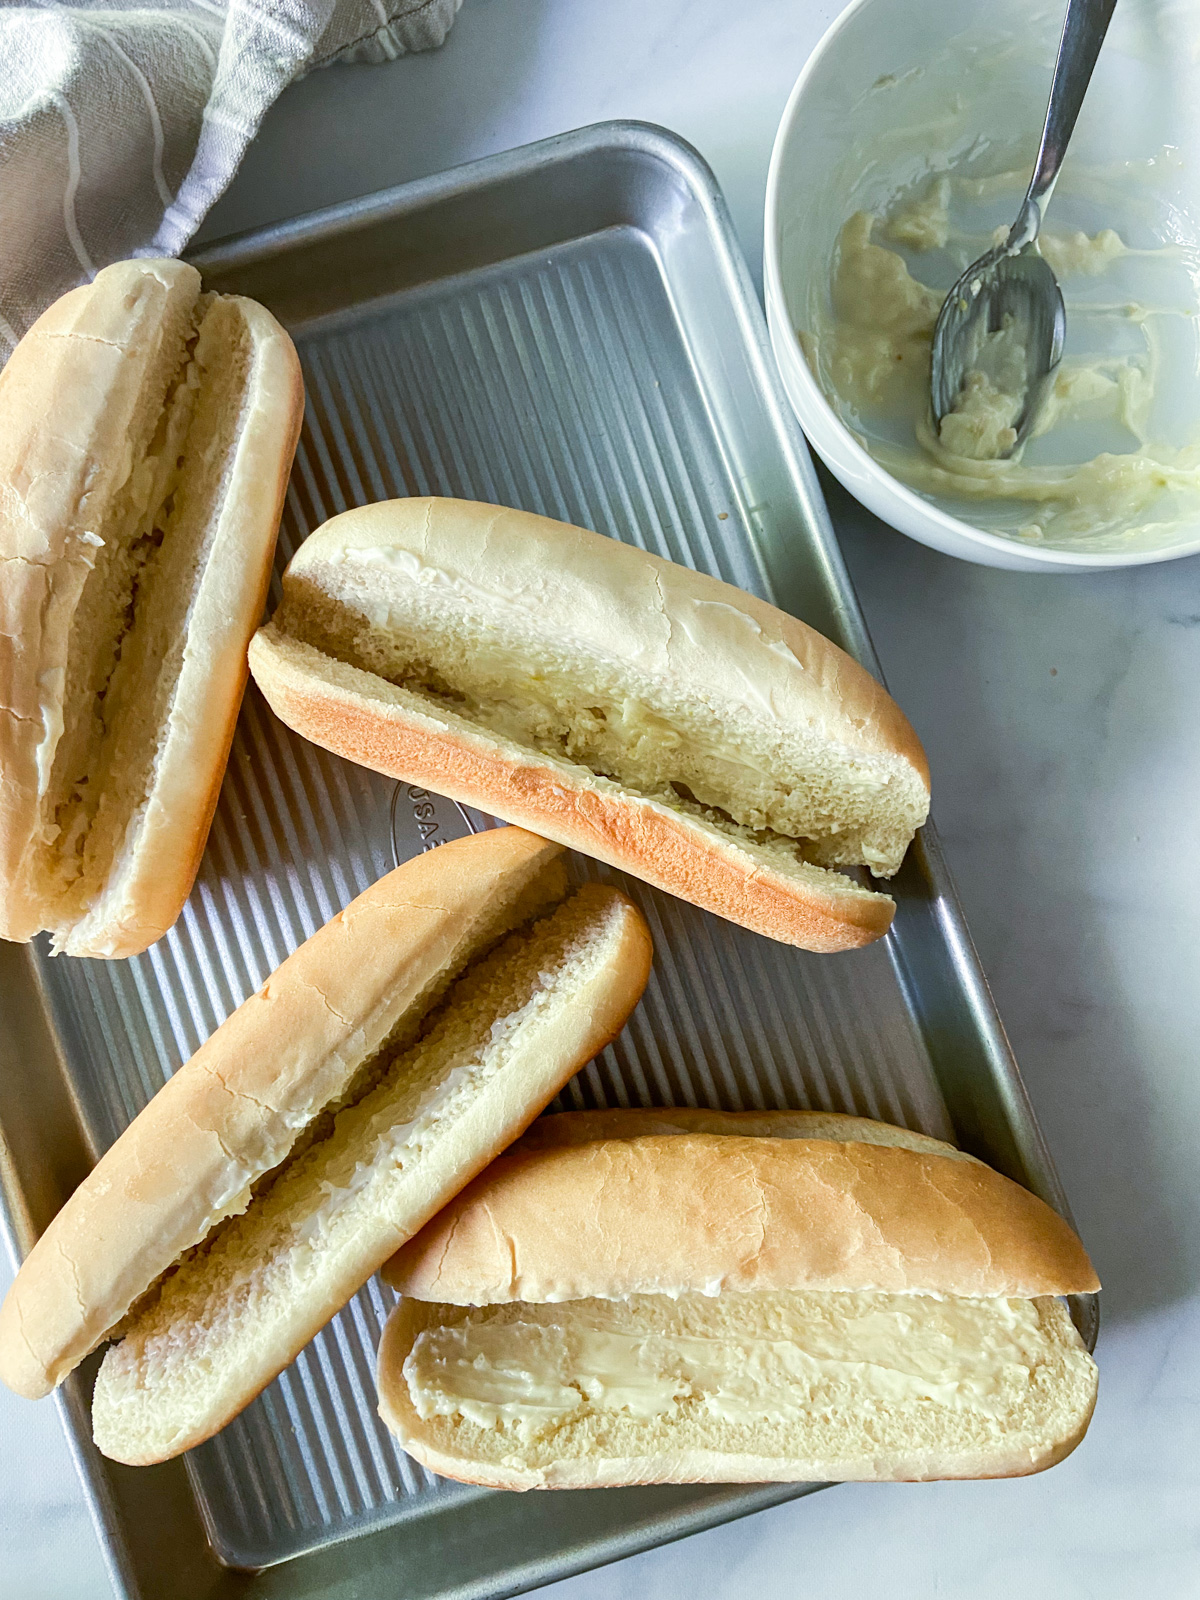 Four rolls with garlic butter spread inside.